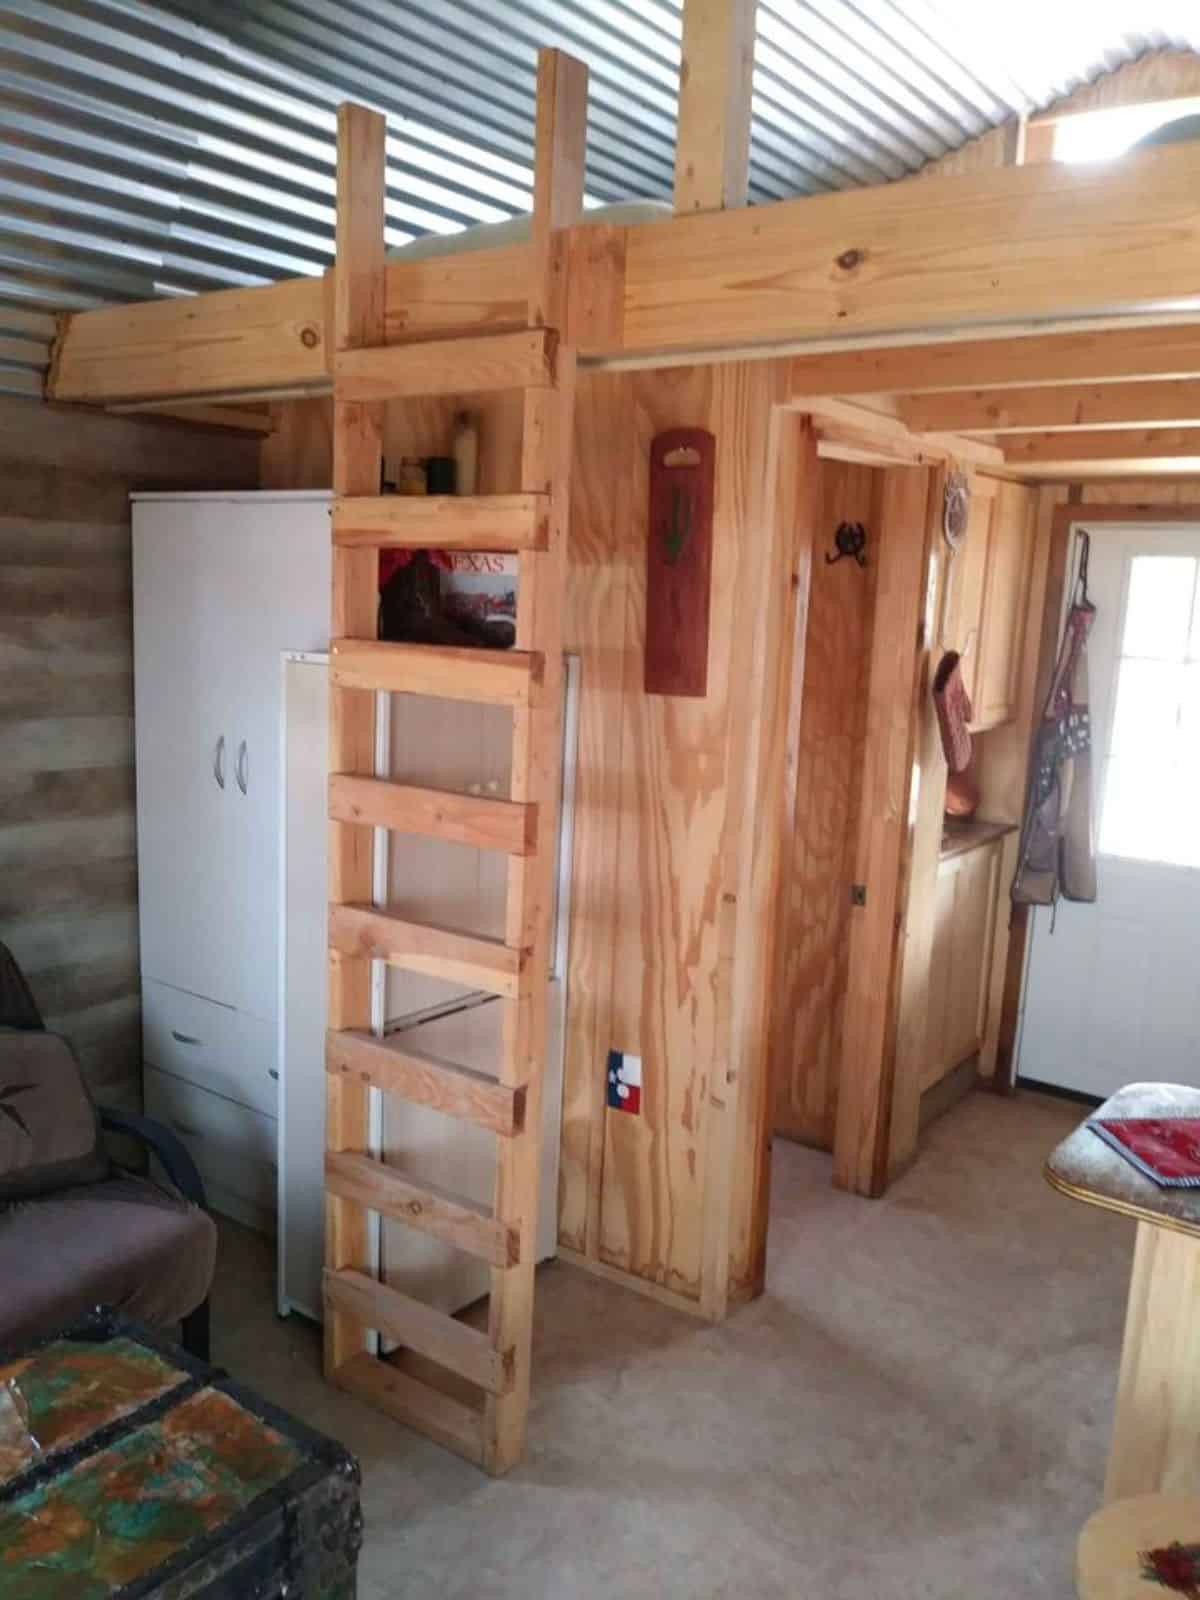 Ladder leading to the loft bedroom of well insulated tiny house